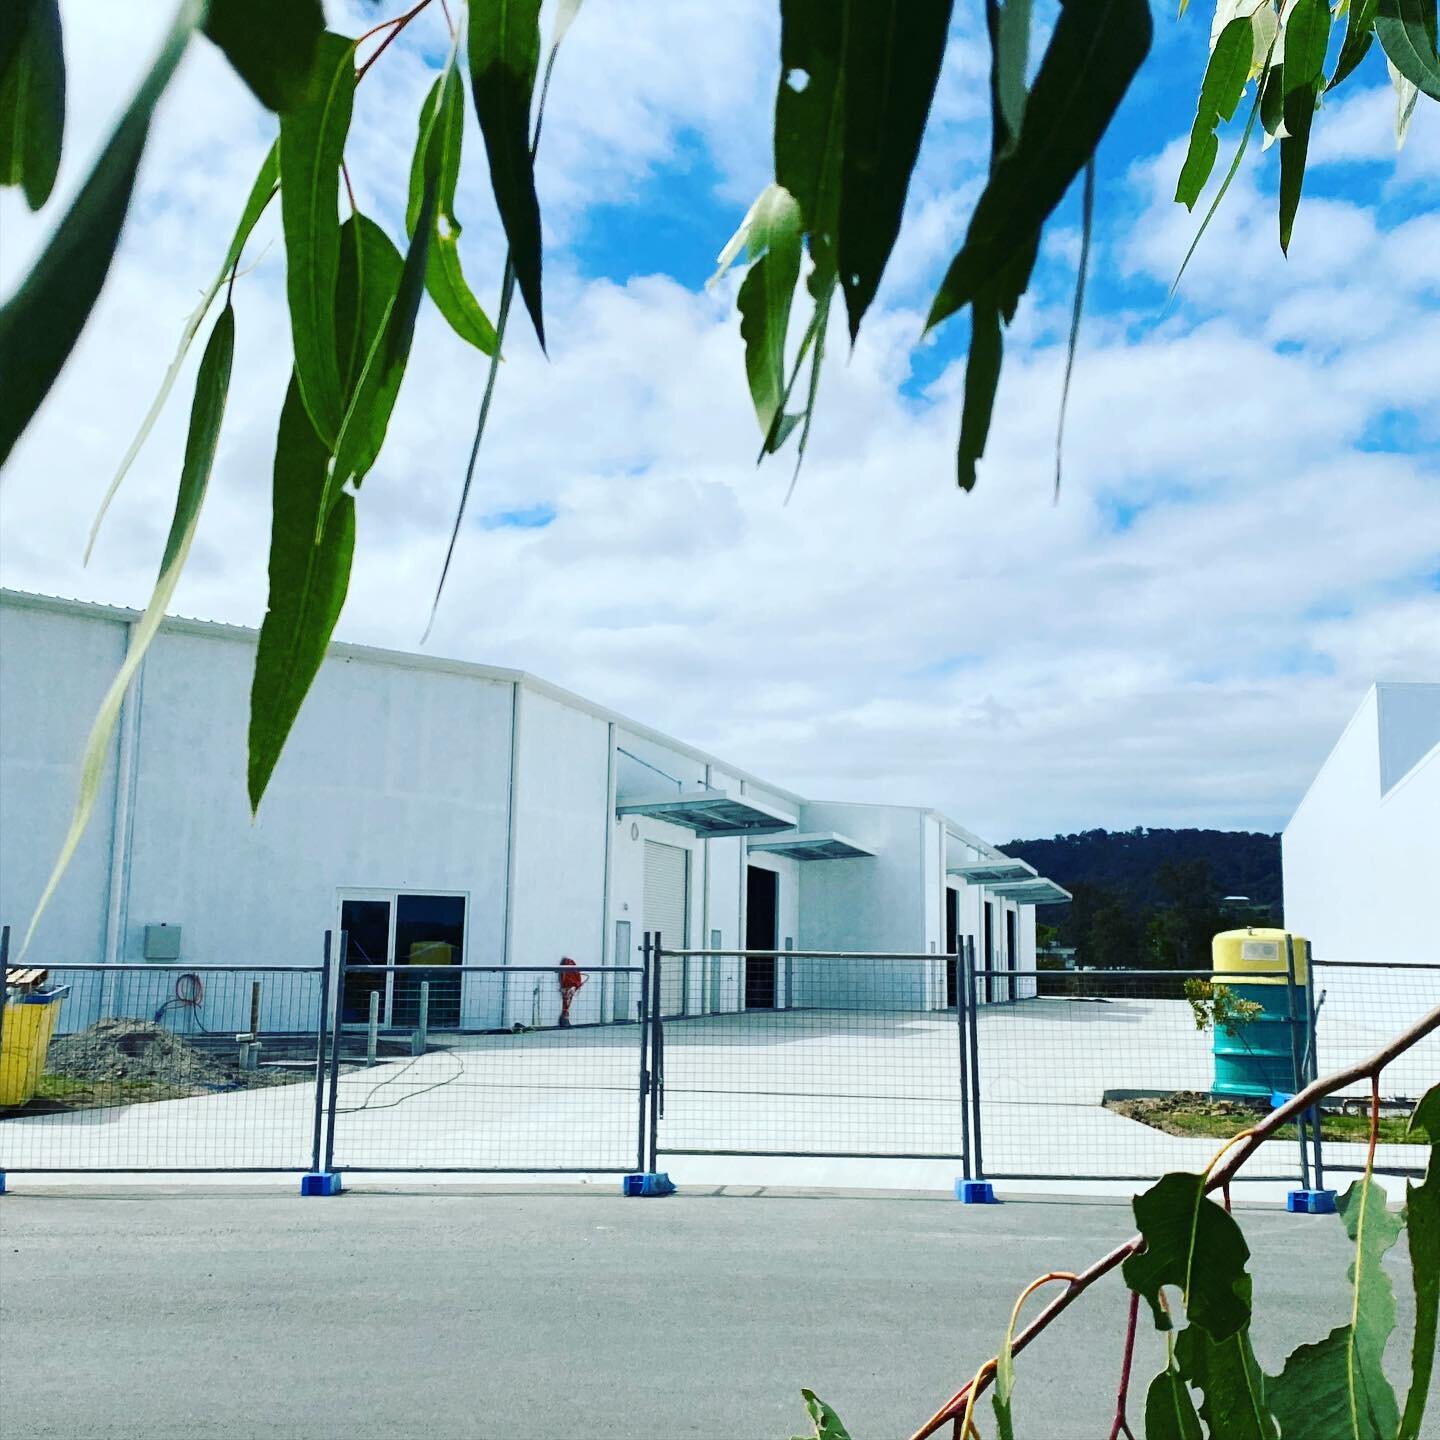 Lot 4 in the Yandina Highway Industrial Park is close to completion. Adapt Town Planning have proudly secured development approvals for 5 of the 10 lots within this industrial park.